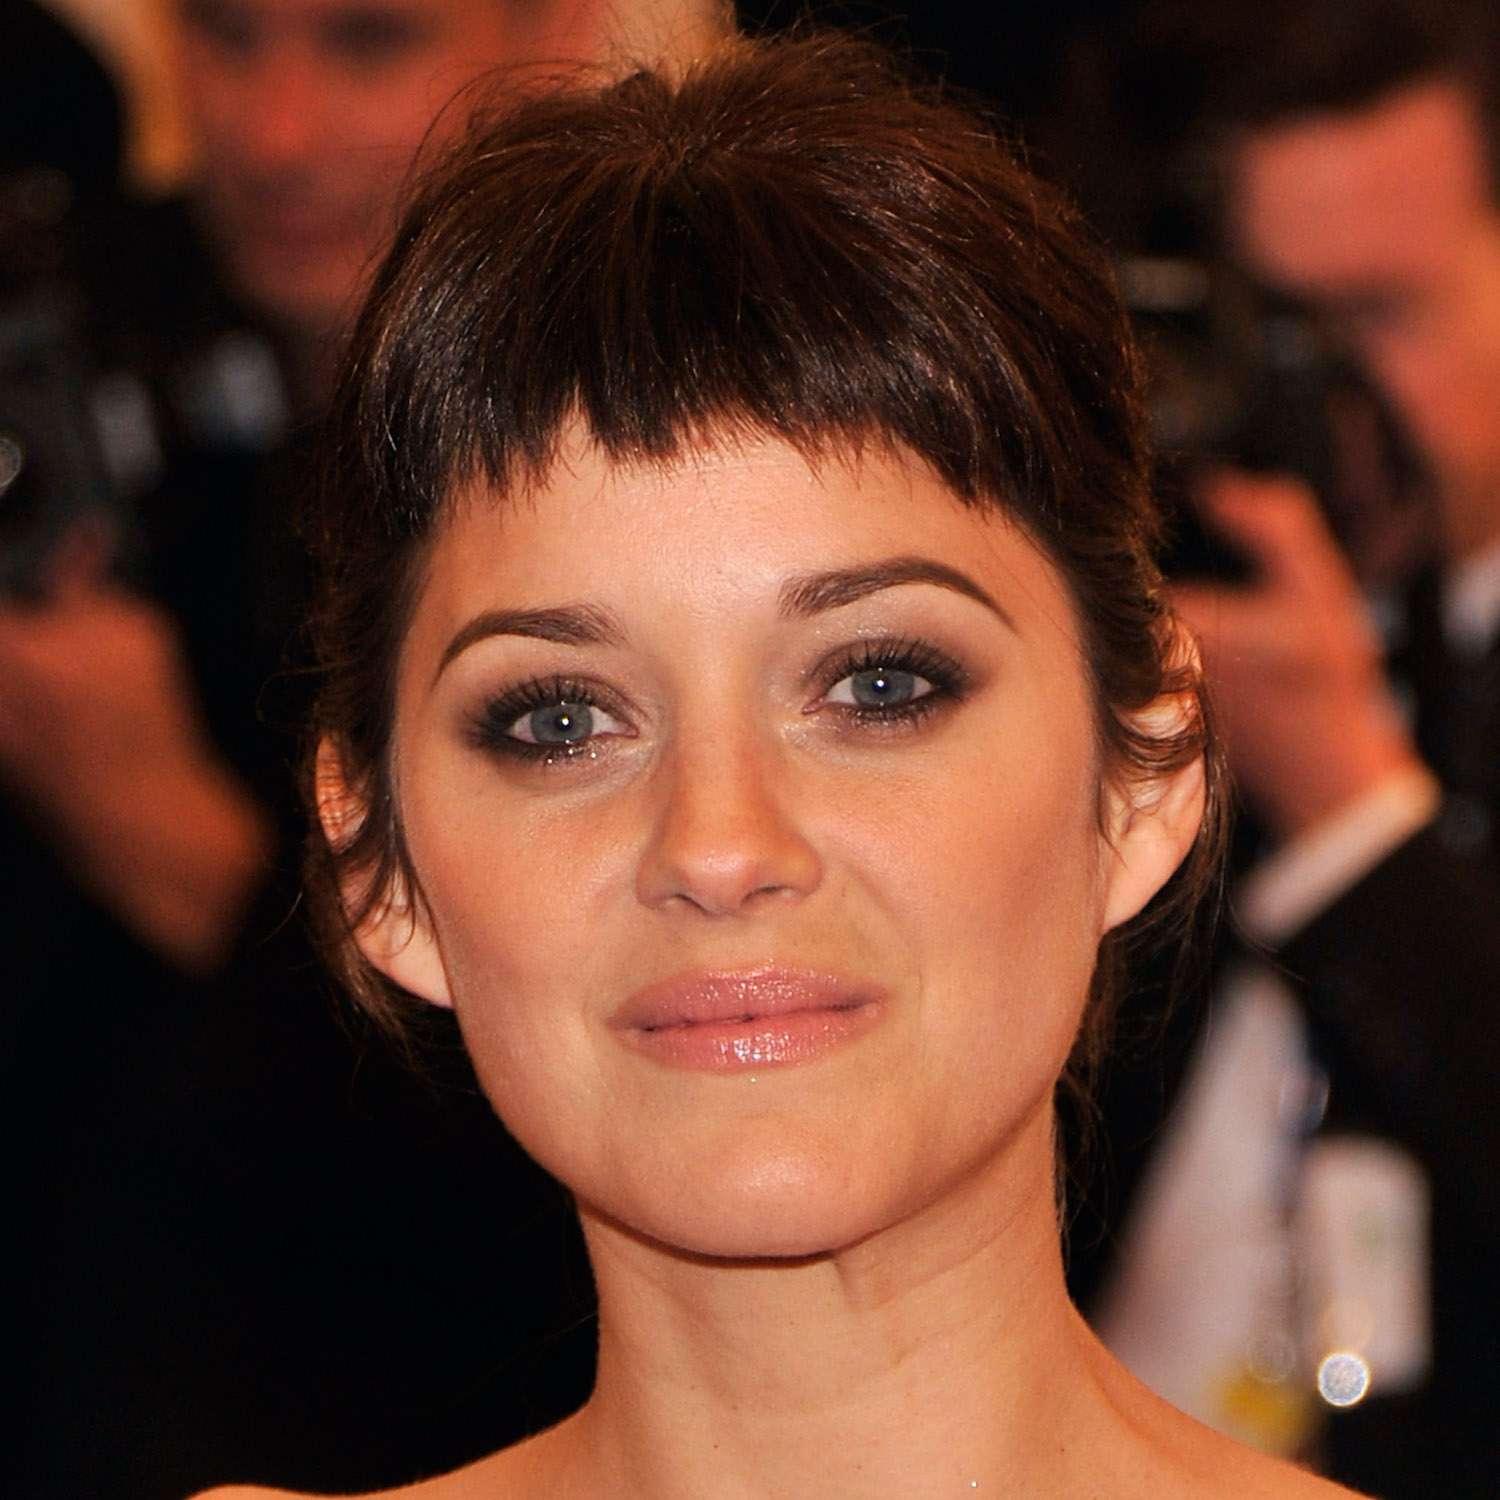 Marion Cotillard wears an updo with feathered baby bangs